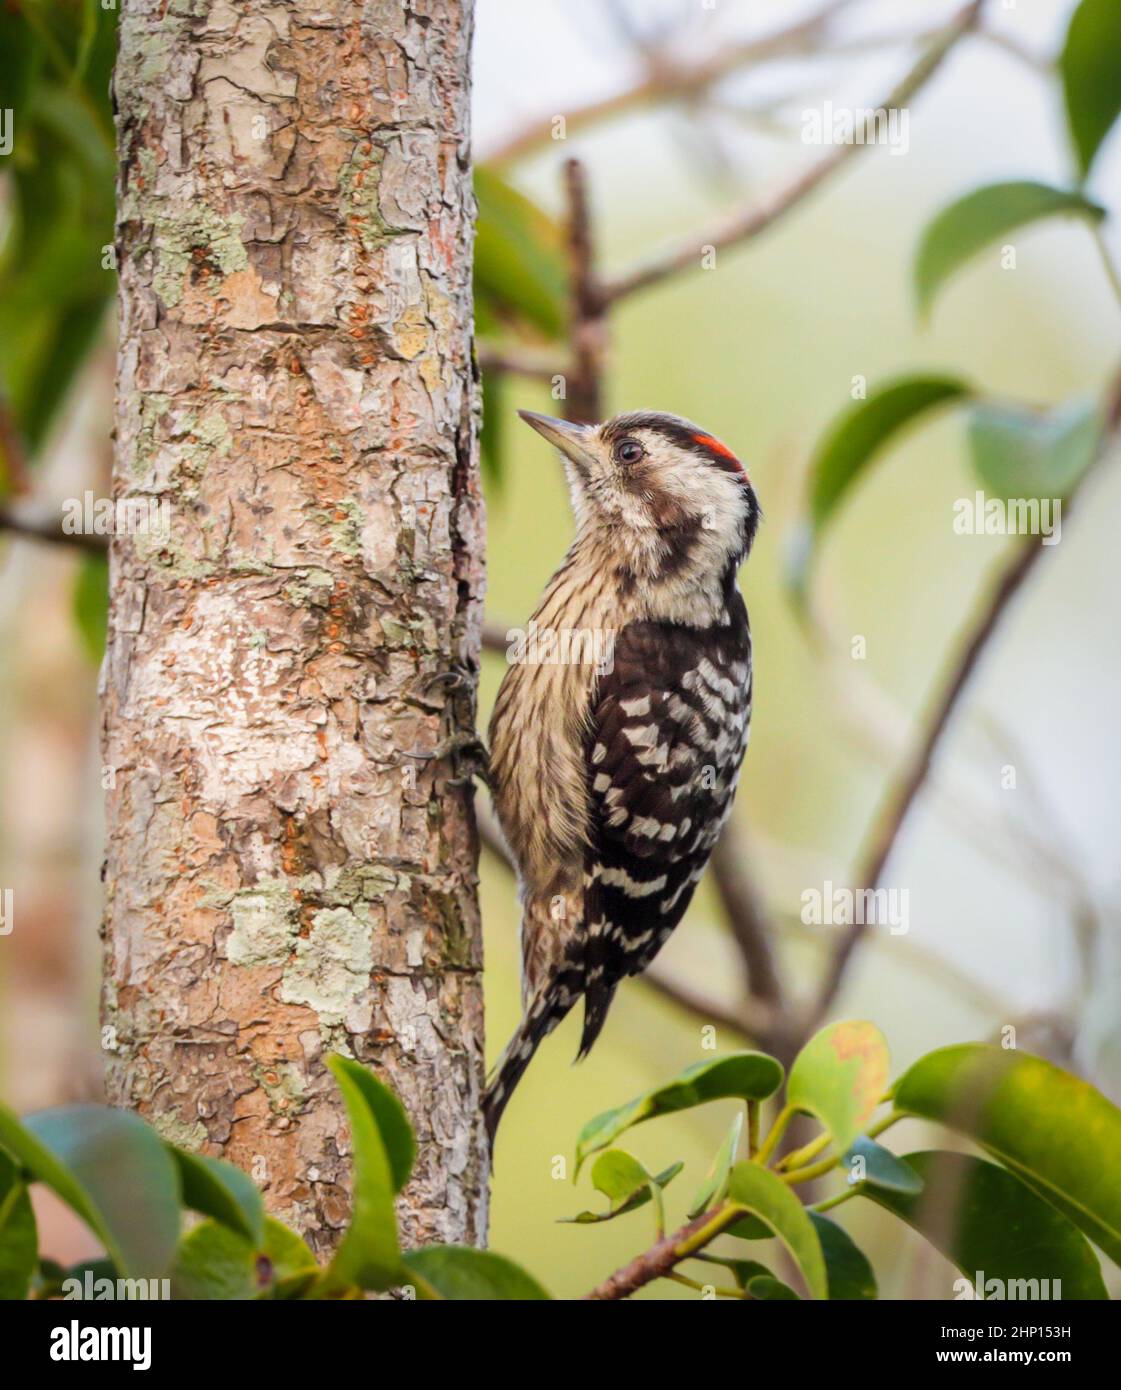 Grey-capped pygmy woodpecker is an Asian bird species of the woodpecker family. This photo was taken from Sundarban,Bangladesh. Stock Photo